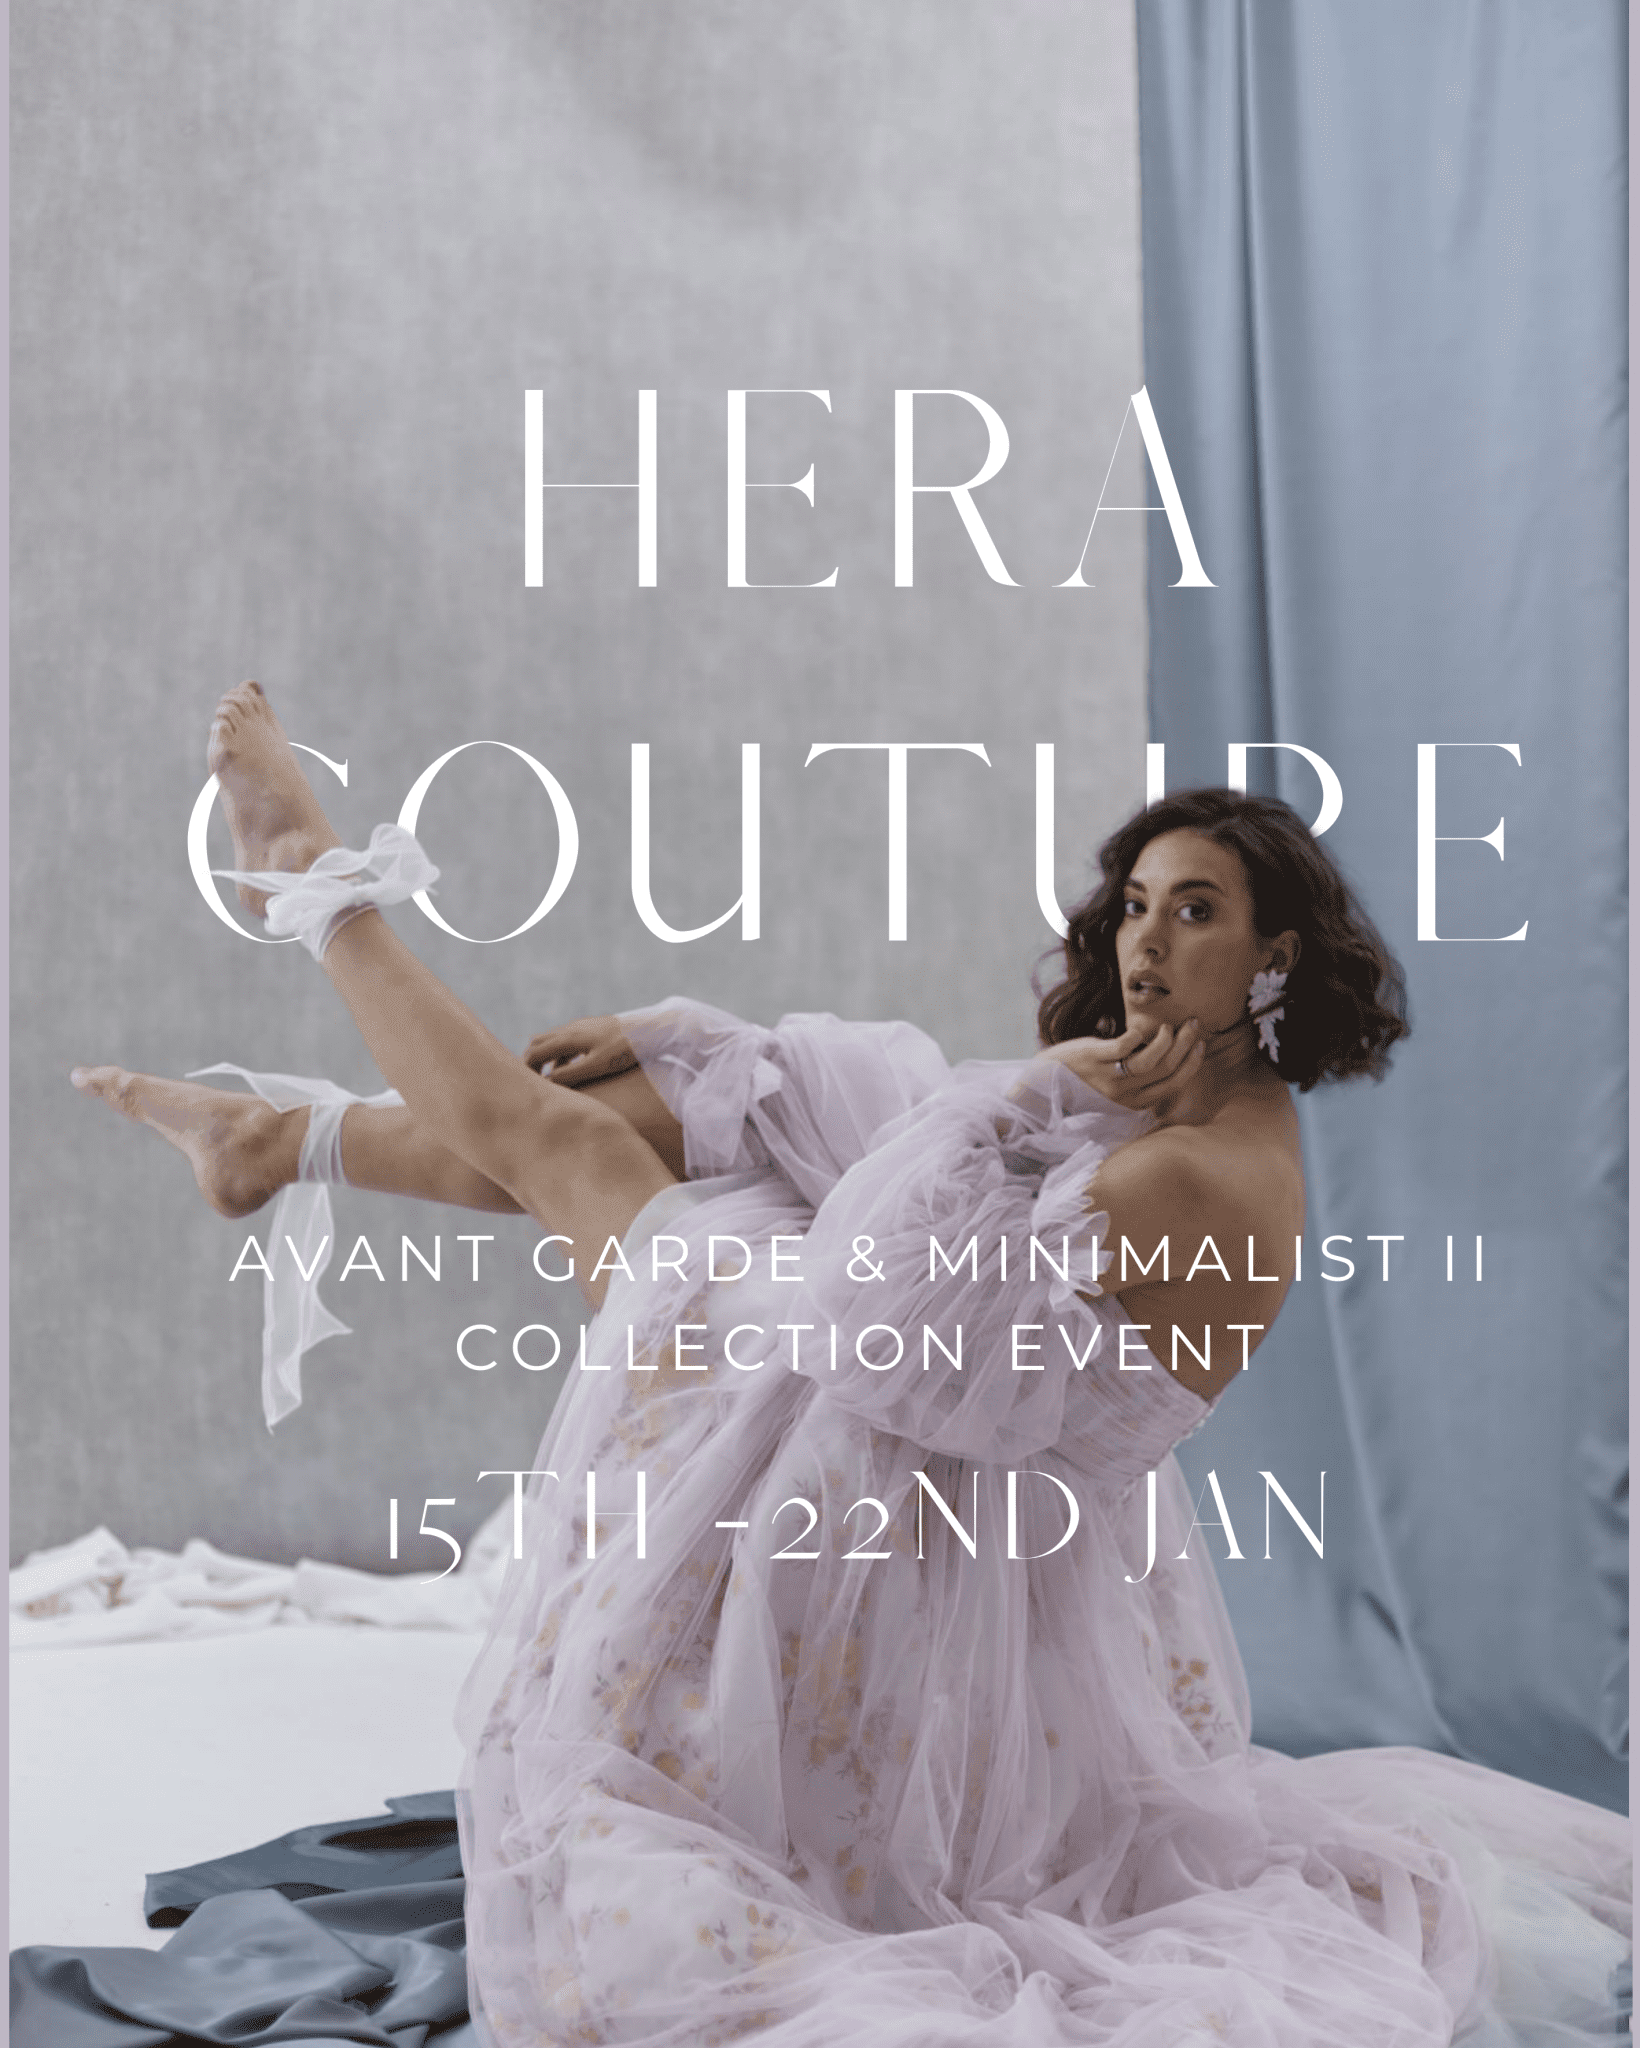 Hera Couture Avant Garde & Minimalist II Collection Event - White Lily Couture